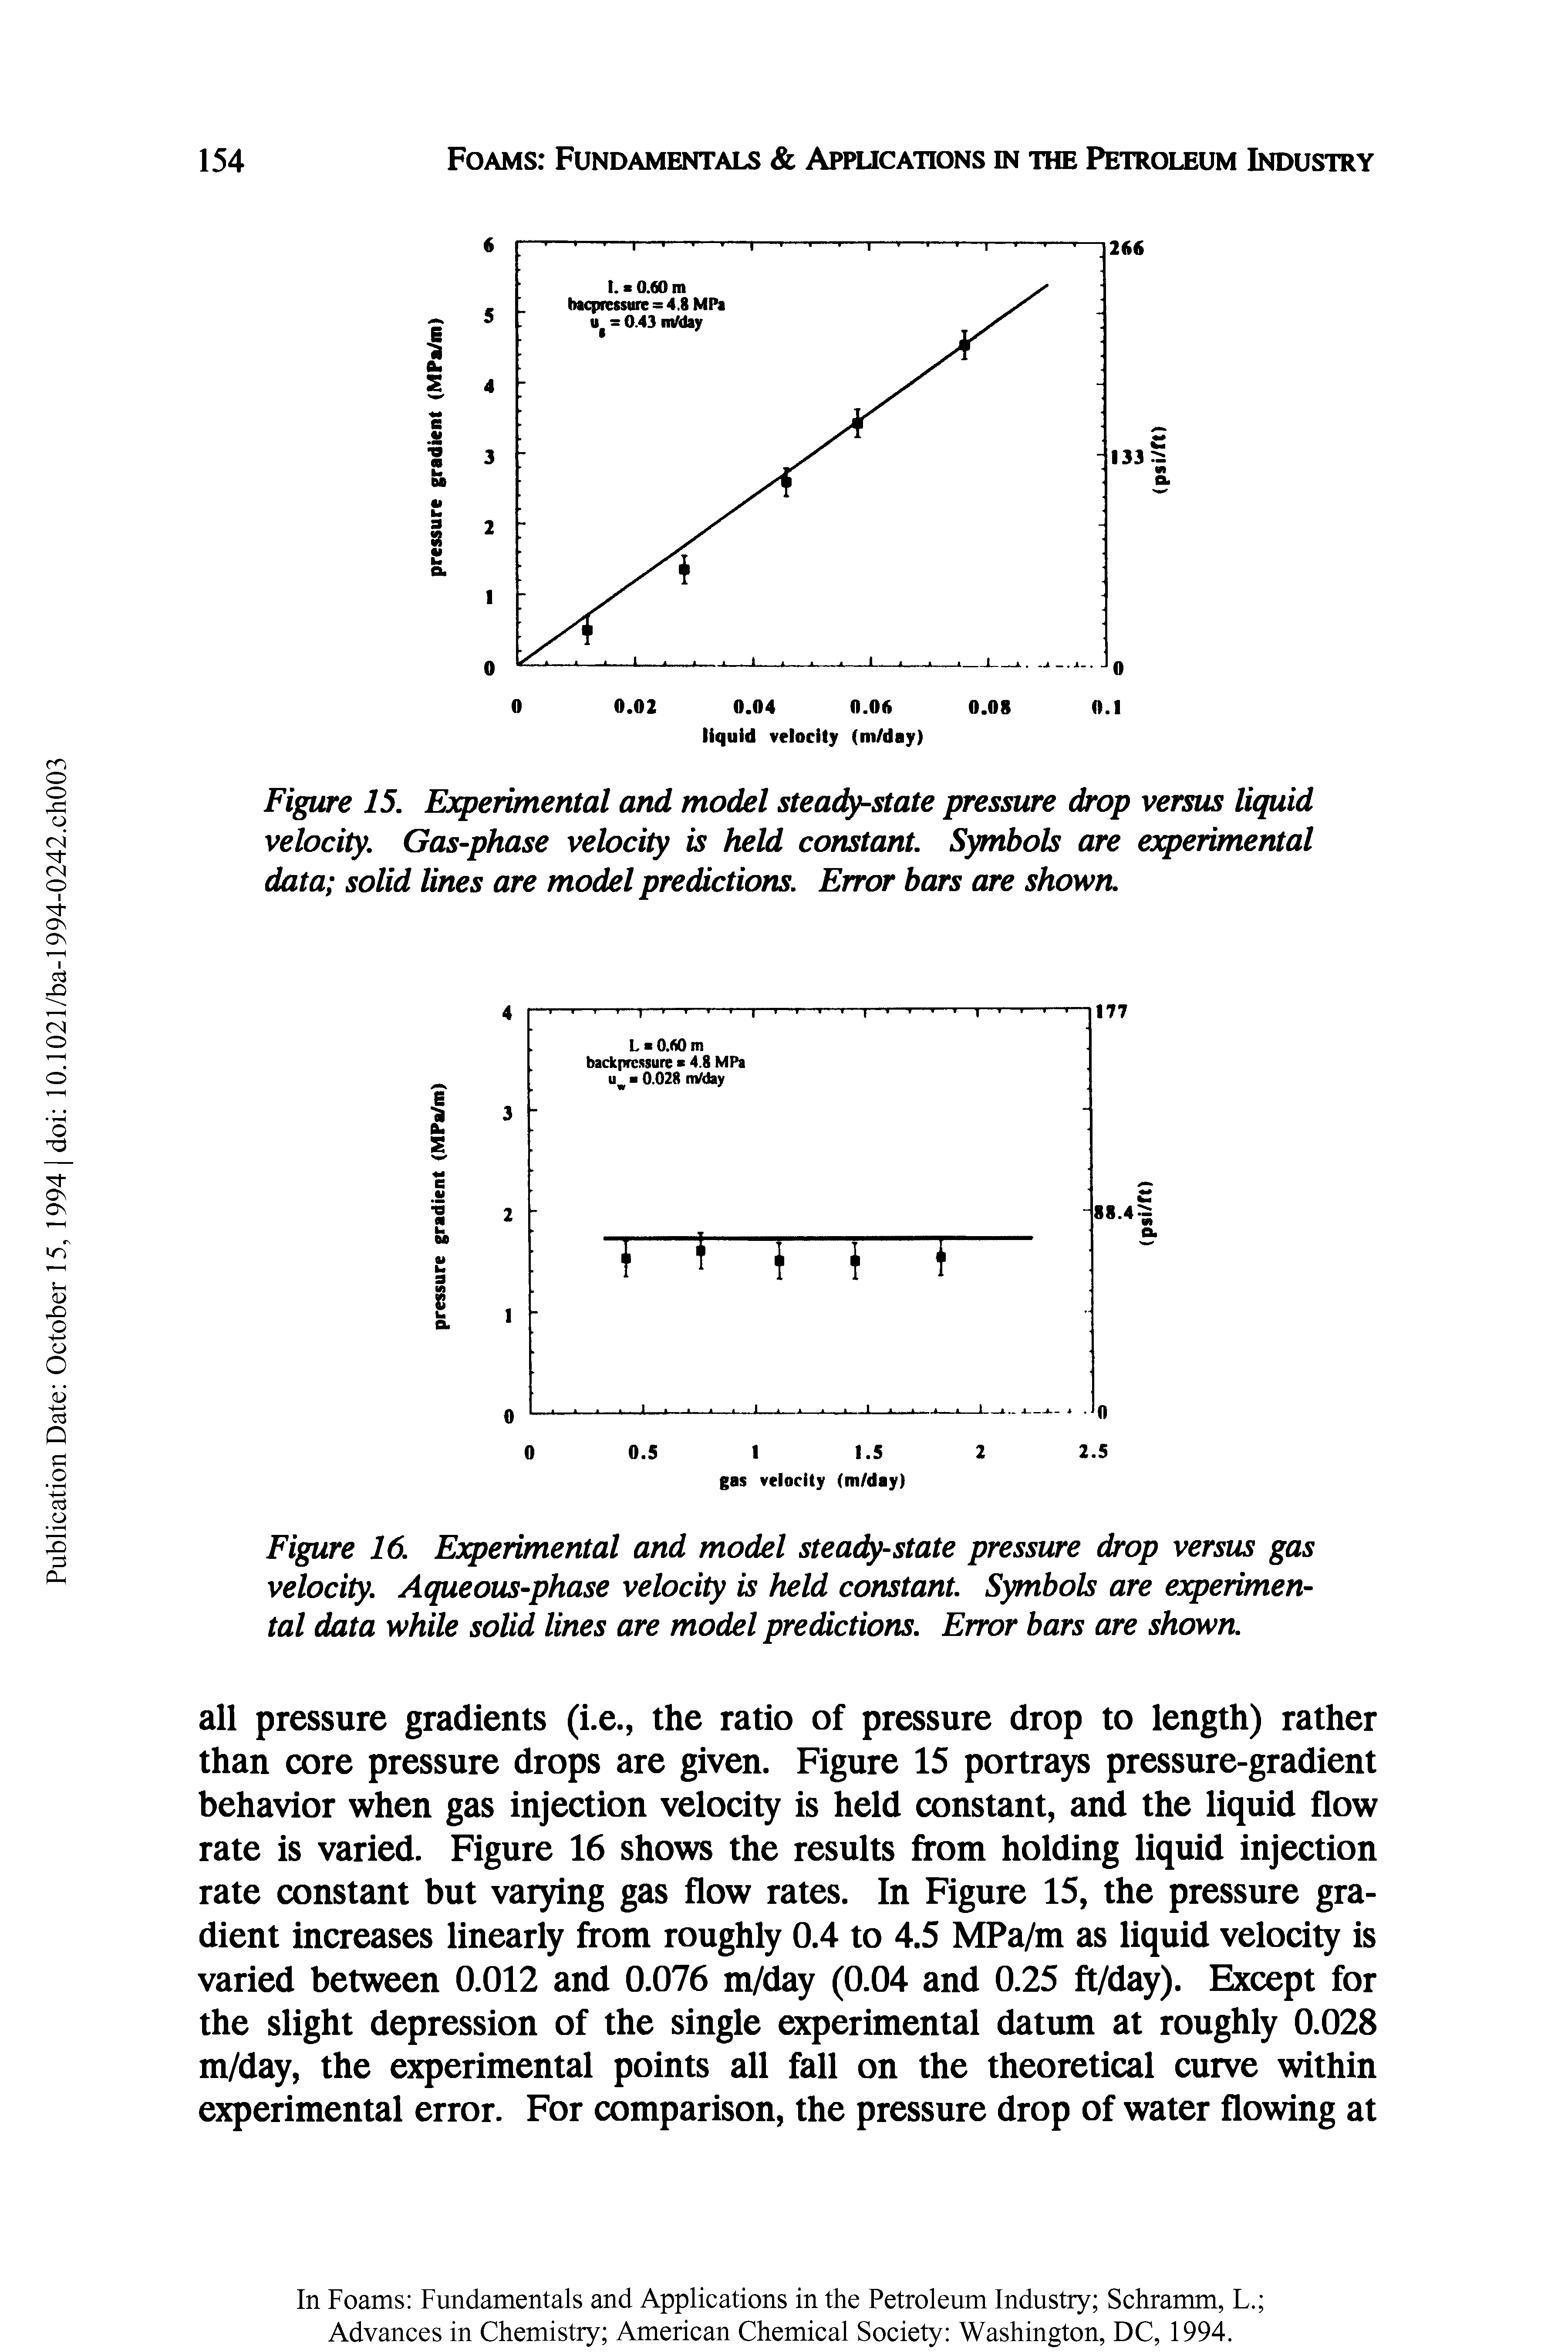 Figure 15. Experimental and model steady-state pressure drop versus liquid velocity. Gas-phase velocity is held constant. Symbols are experimental data solid lines are model predictions. Error bars are shown.